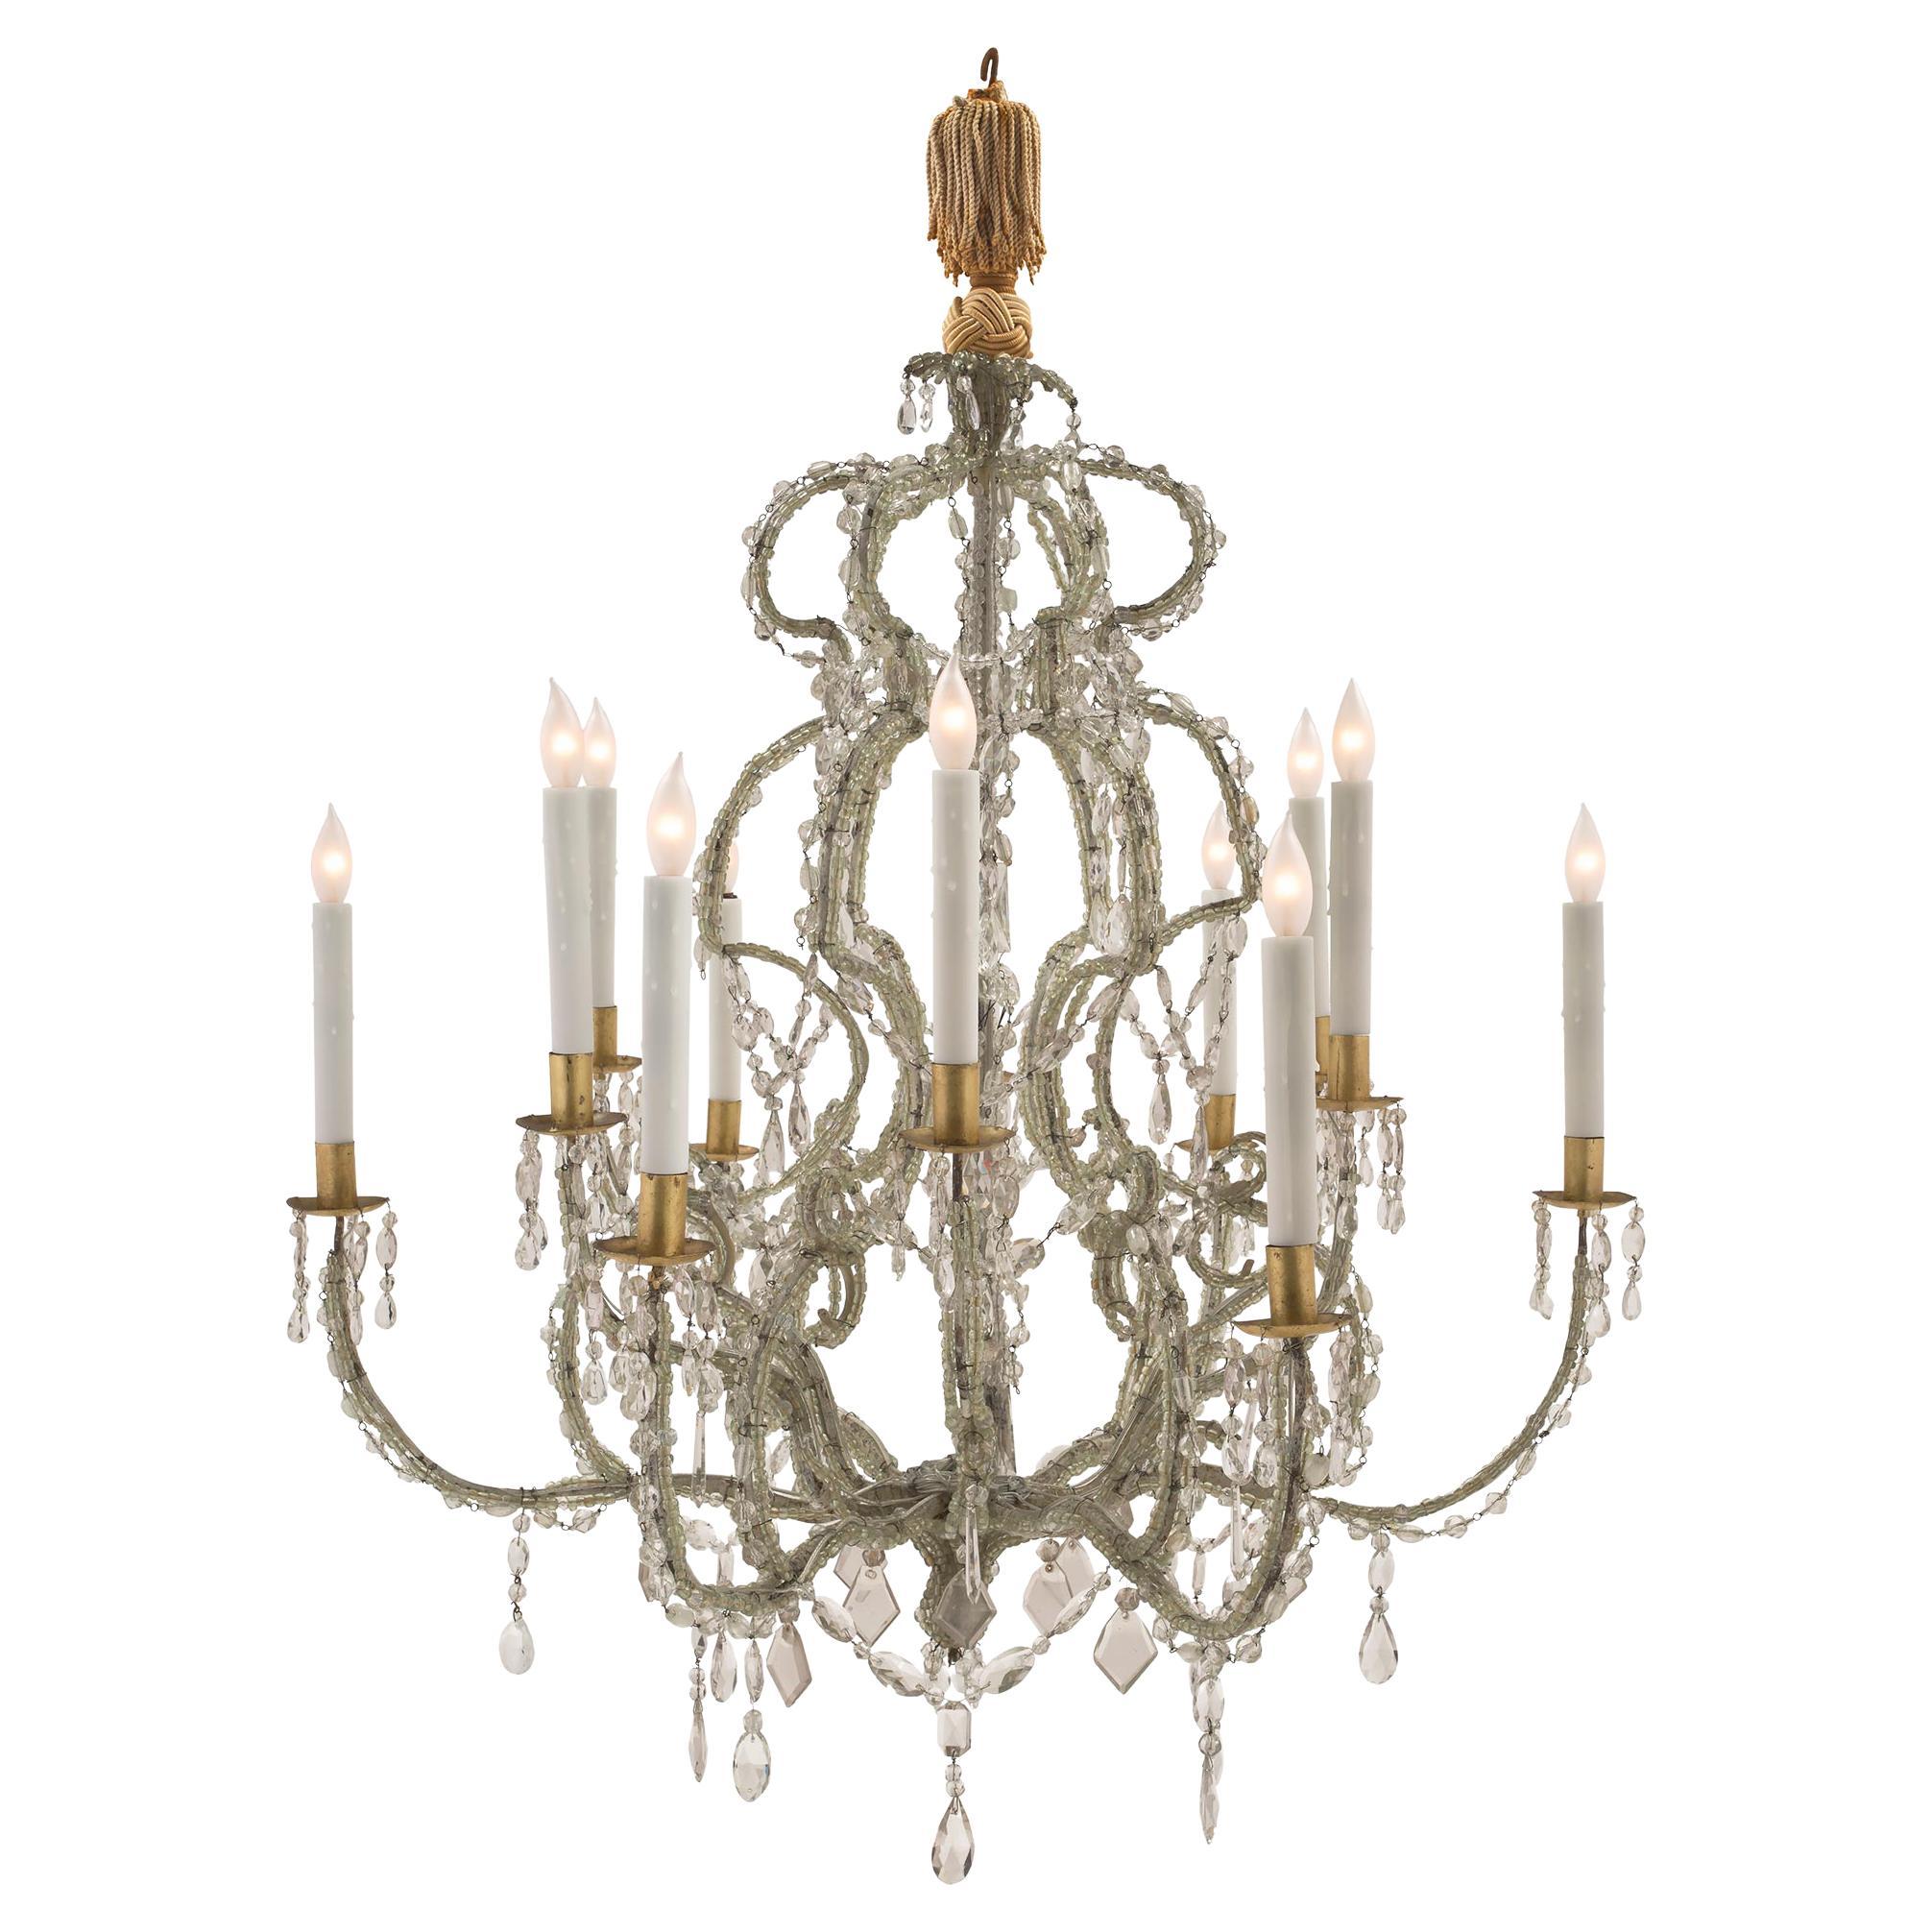 Italian Early 19th Century Louis XV Style Iron, Gilt and Crystal Chandelier For Sale